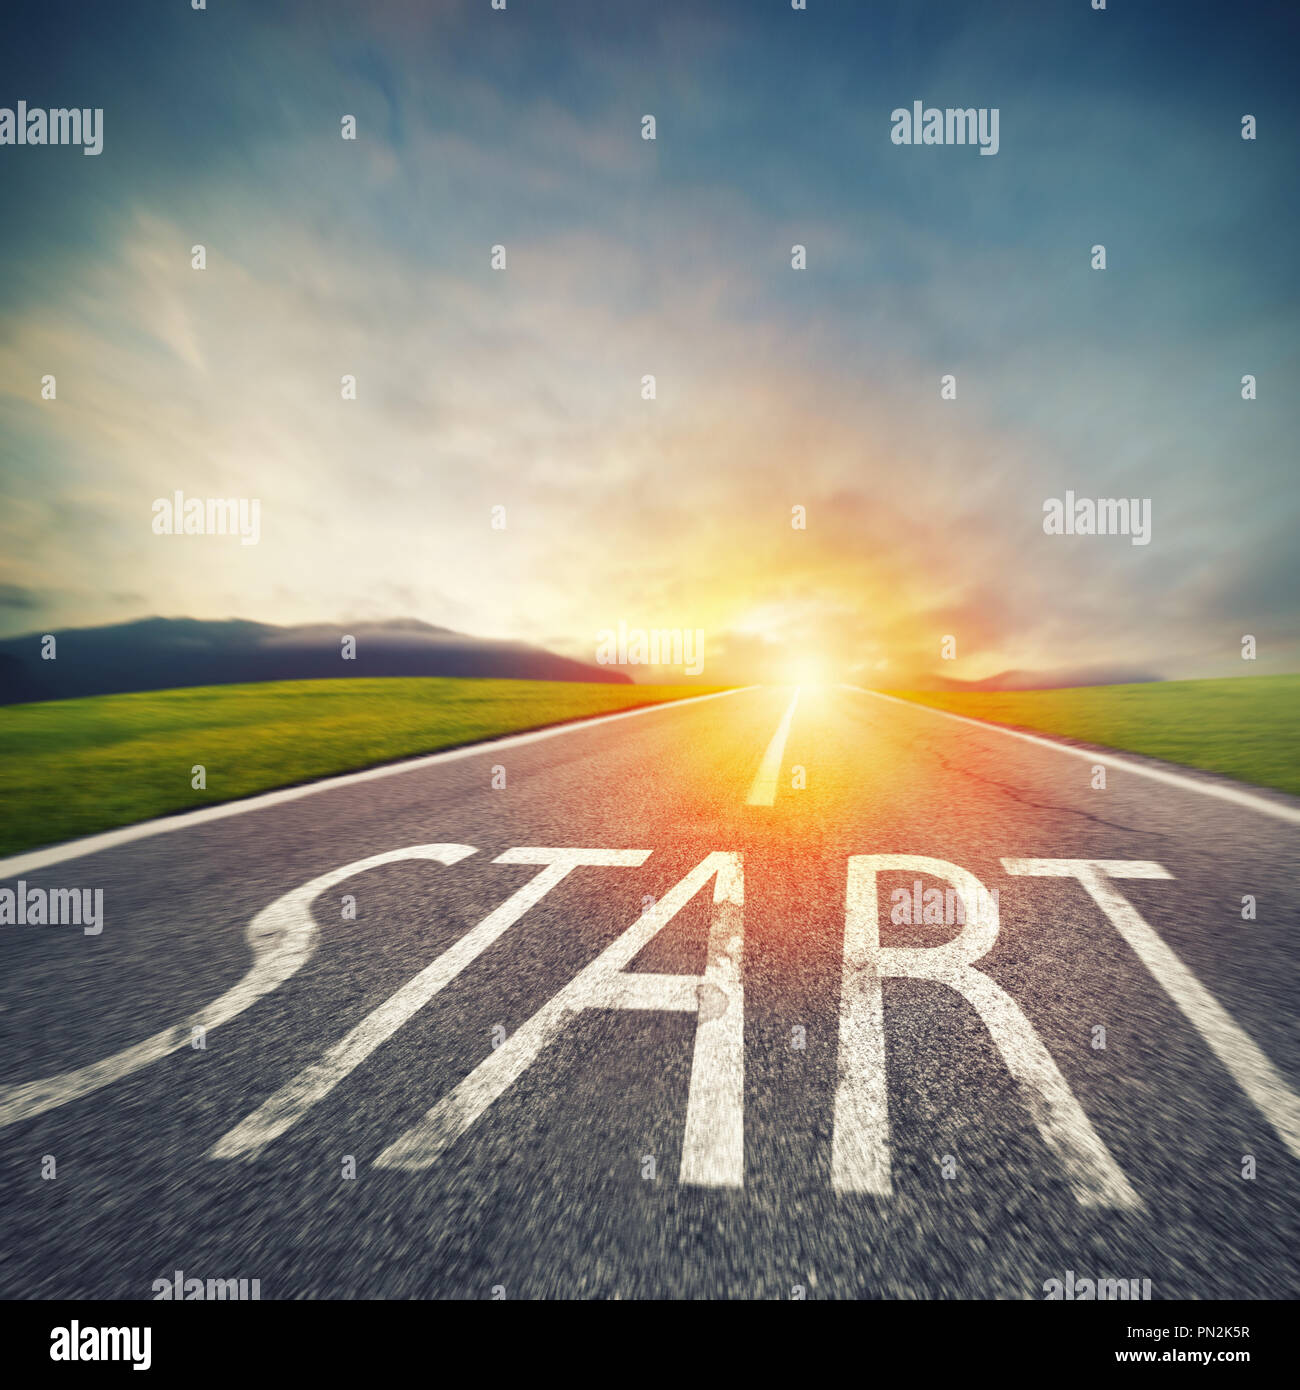 Start written to the ground on a road at sunset. Concept of new beginning and starting new opportunities Stock Photo